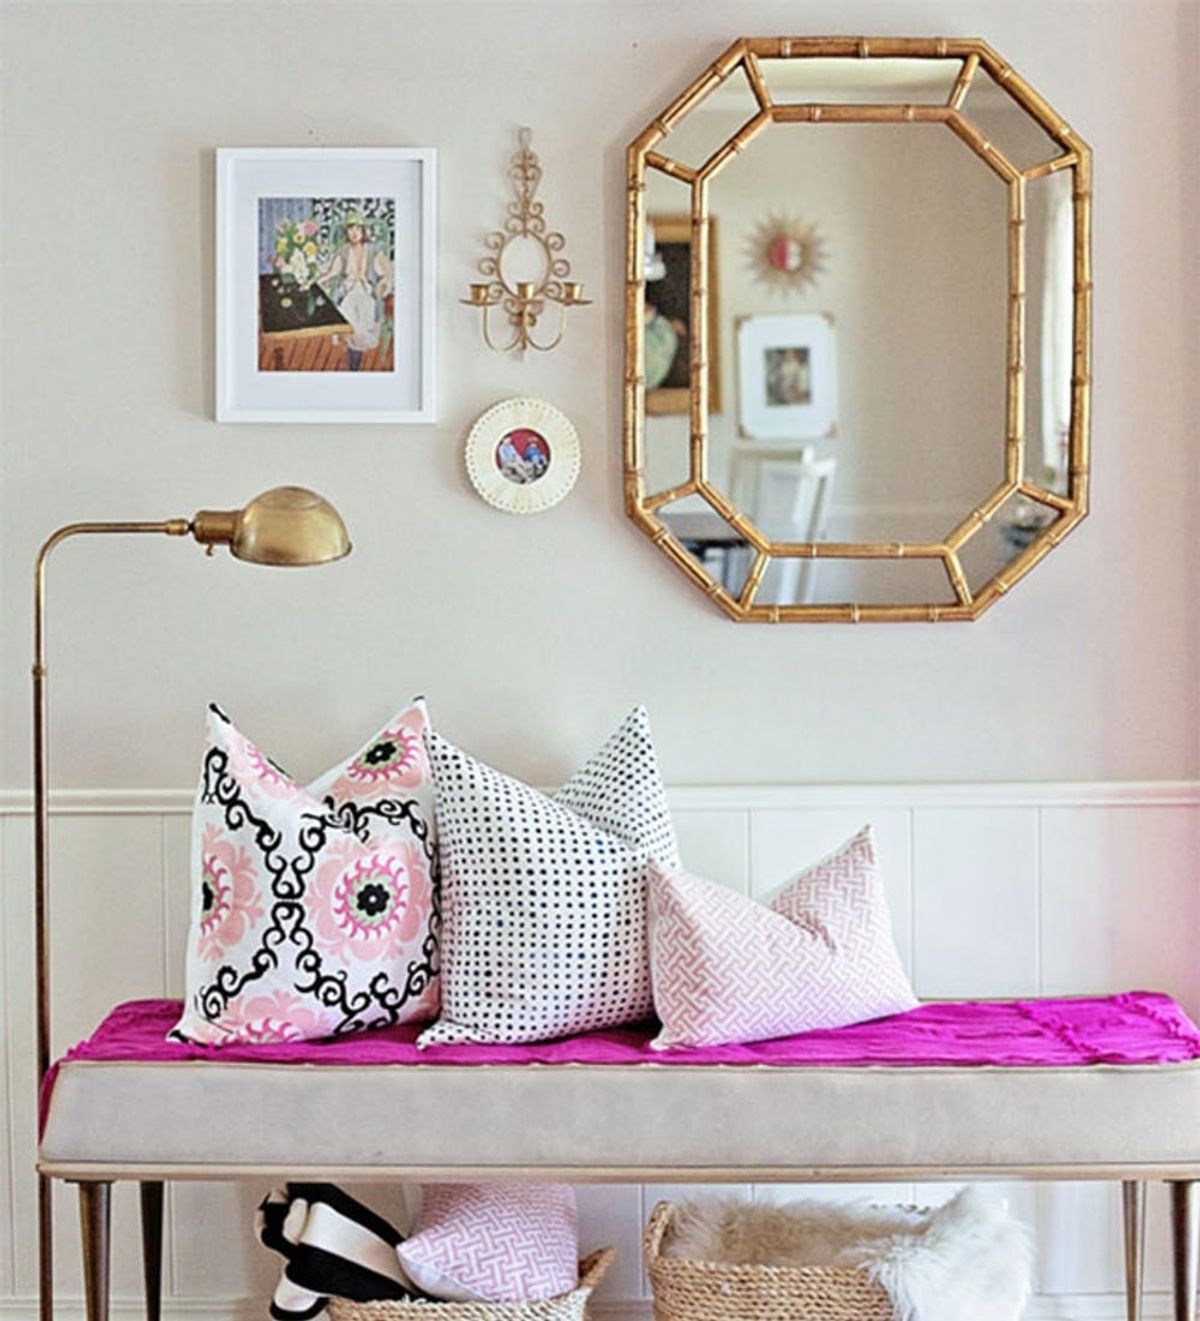 5 Decorating Hacks for Small Bedrooms